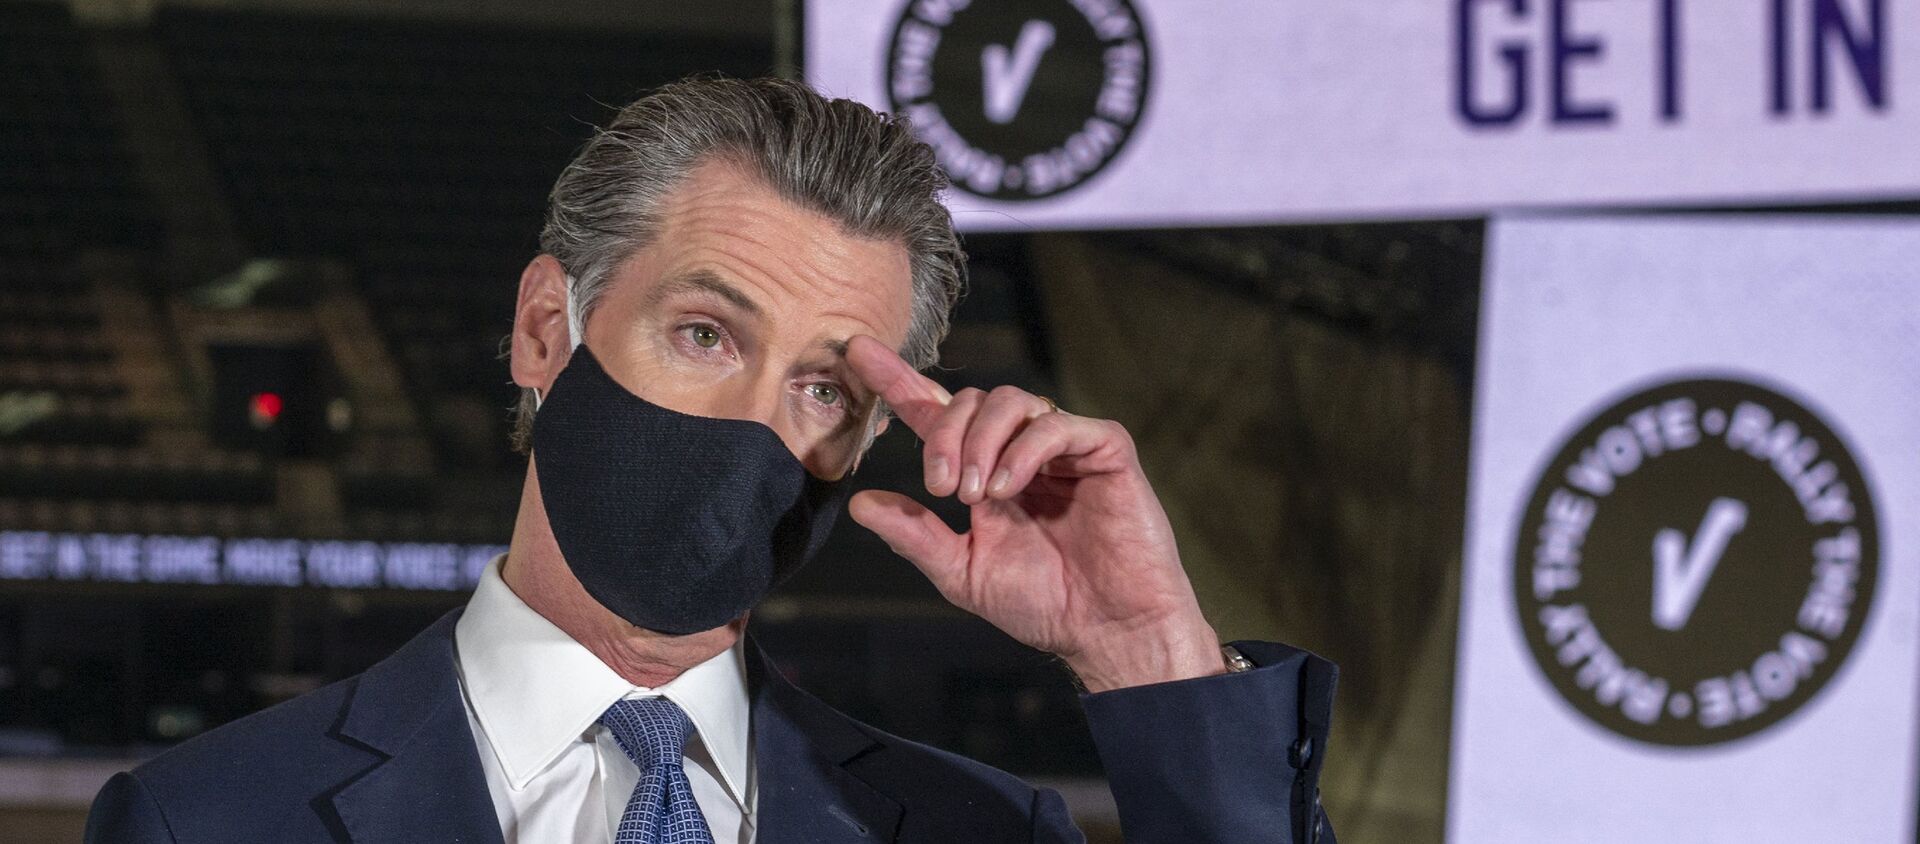  In this Oct 29, 2020, file photo, California Gov. Gavin Newsom speaks to reporters at Golden 1 Center in Sacramento, Calif. Gov. Newsom is facing a possible recall election as the nation's most populous state struggles to emerge from the coronavirus crisis - Sputnik International, 1920, 18.06.2021